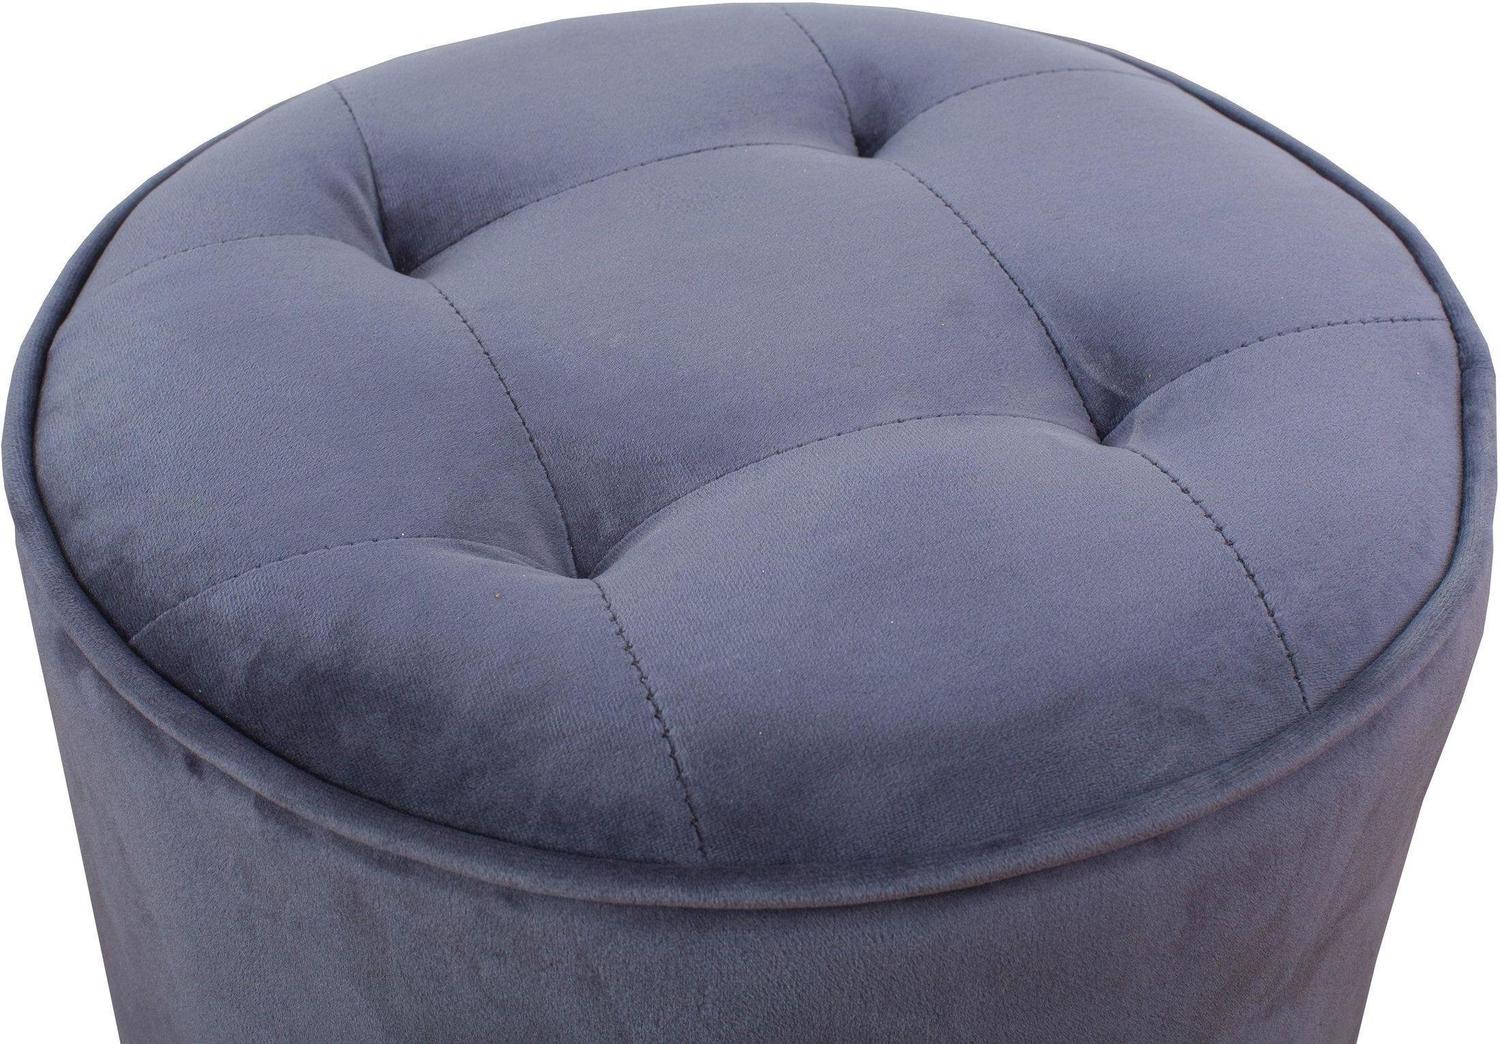 blue upholstered arm chair Contemporary Design Furniture Ottomans Grey